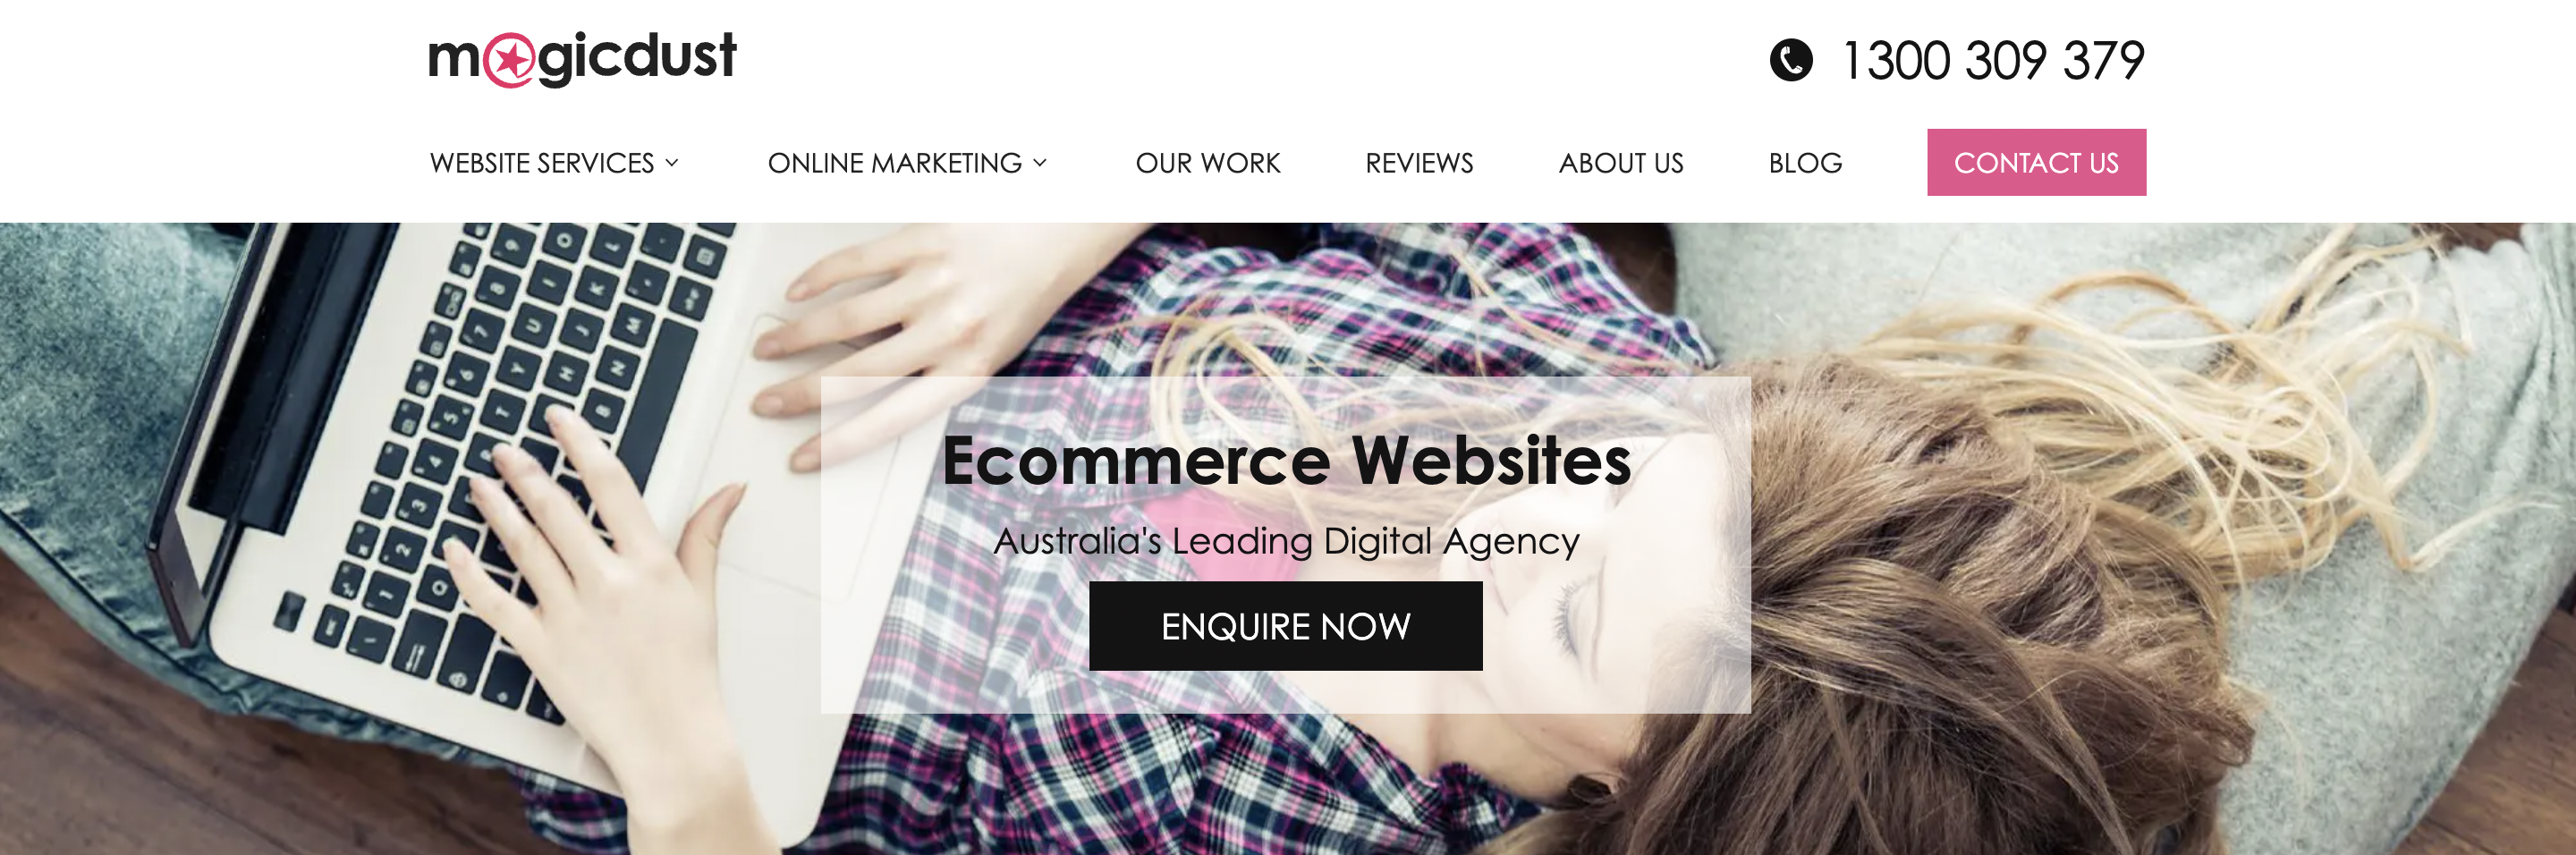 Best Ecommerce Web Development Firms in Melbourne